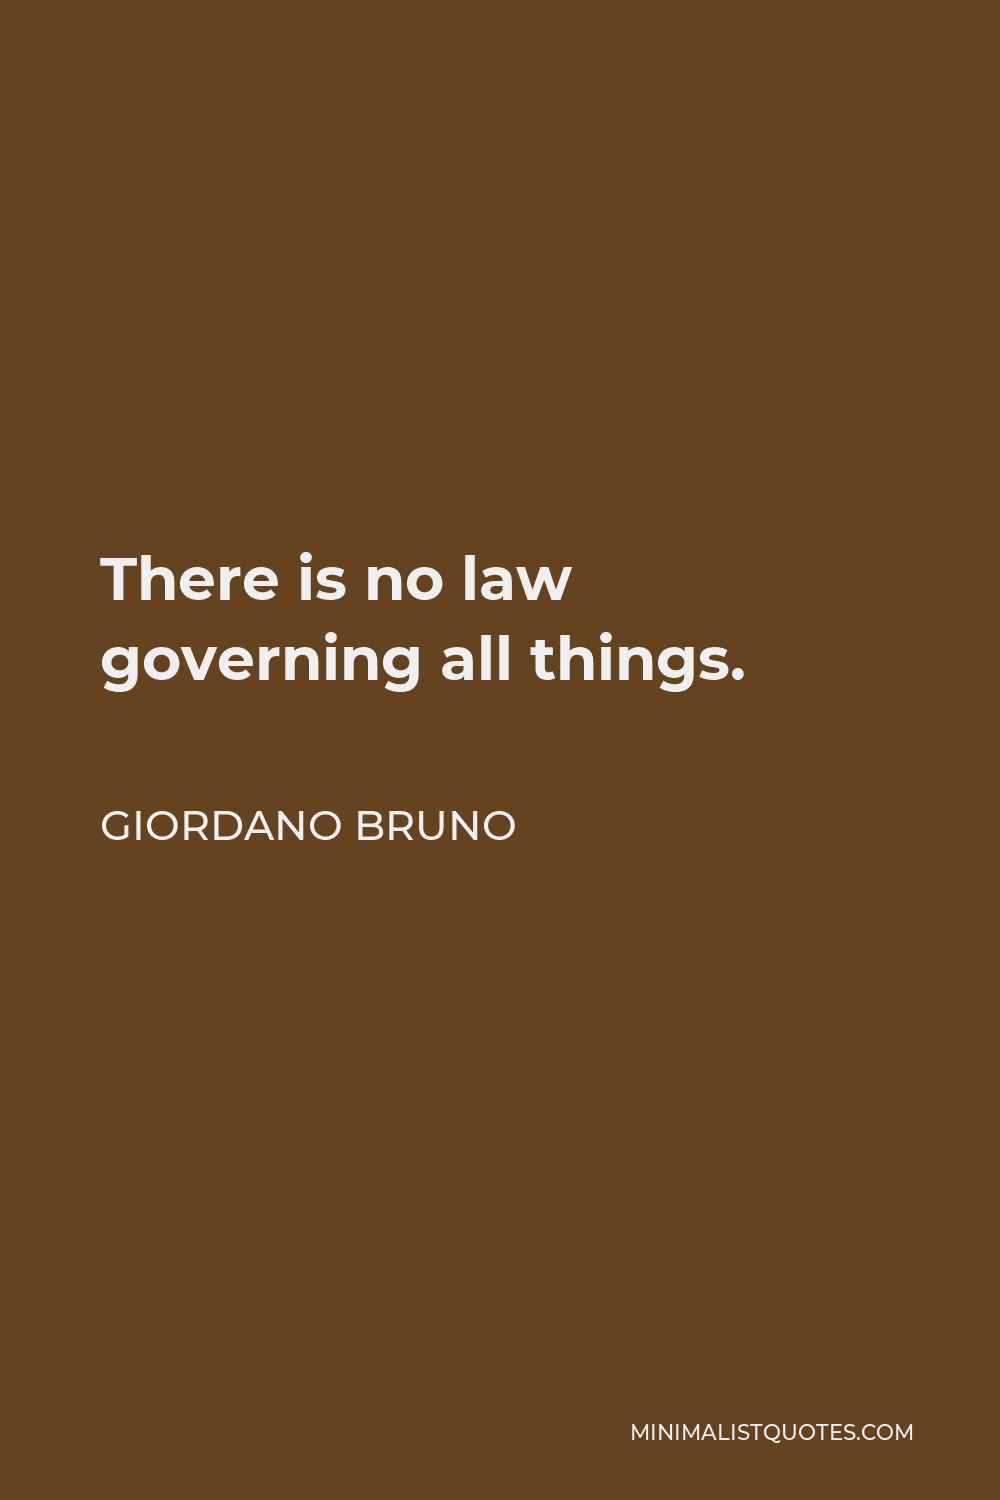 Giordano Bruno Quote - There is no law governing all things.